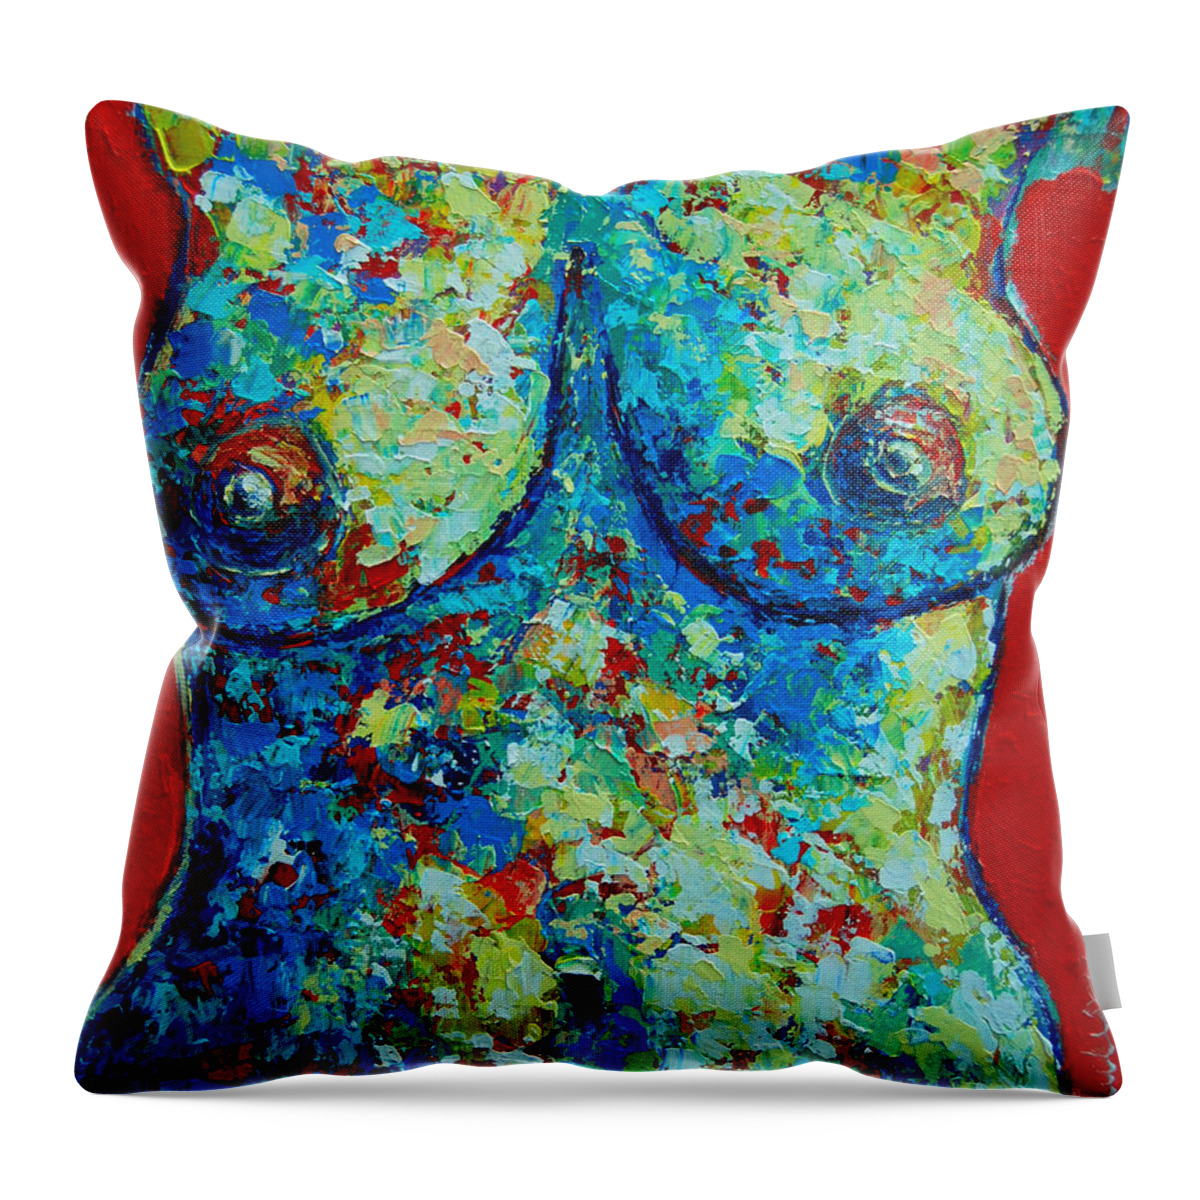 Nude Throw Pillow featuring the painting Bodyscape by Ana Maria Edulescu